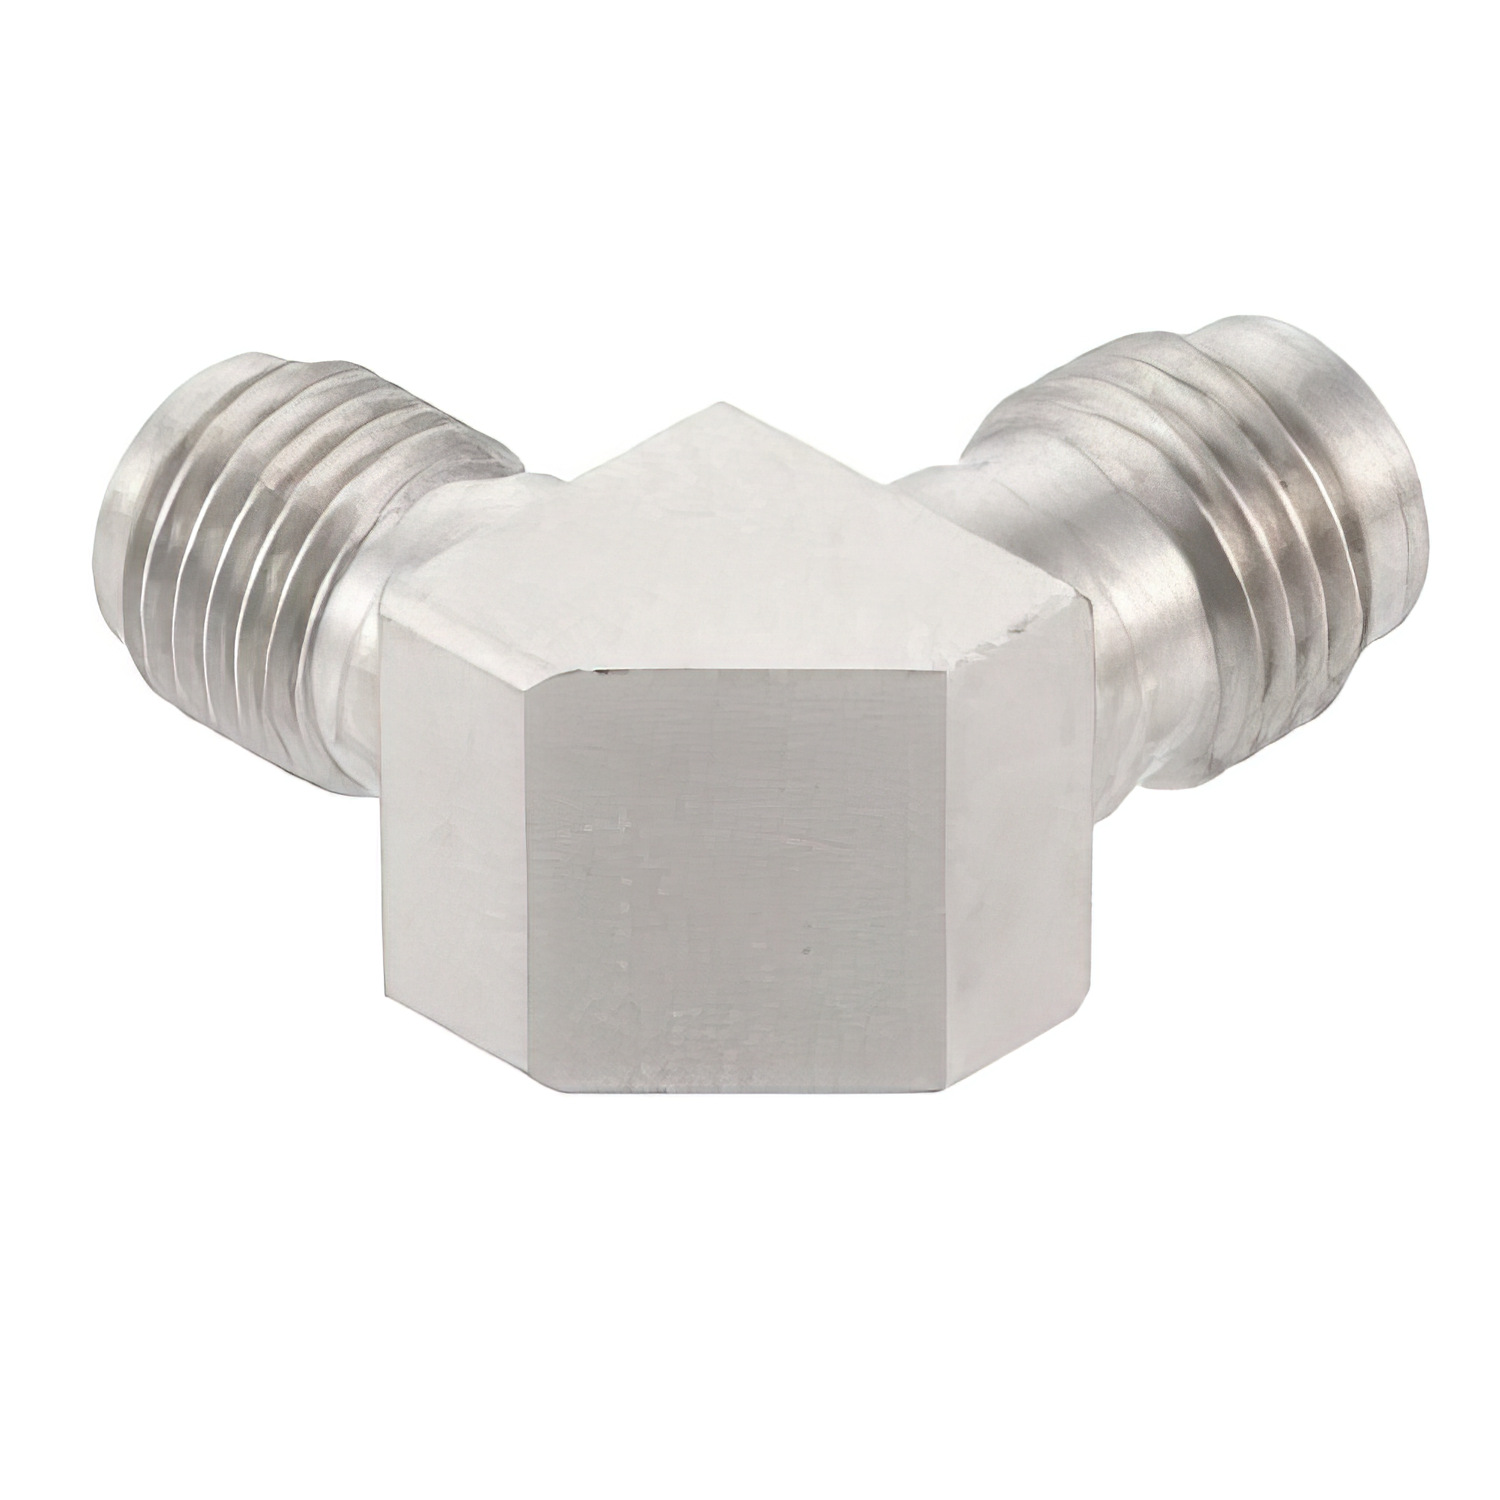 1.85mm Female to 2.92mm Female Miter Right Angle Adapter1